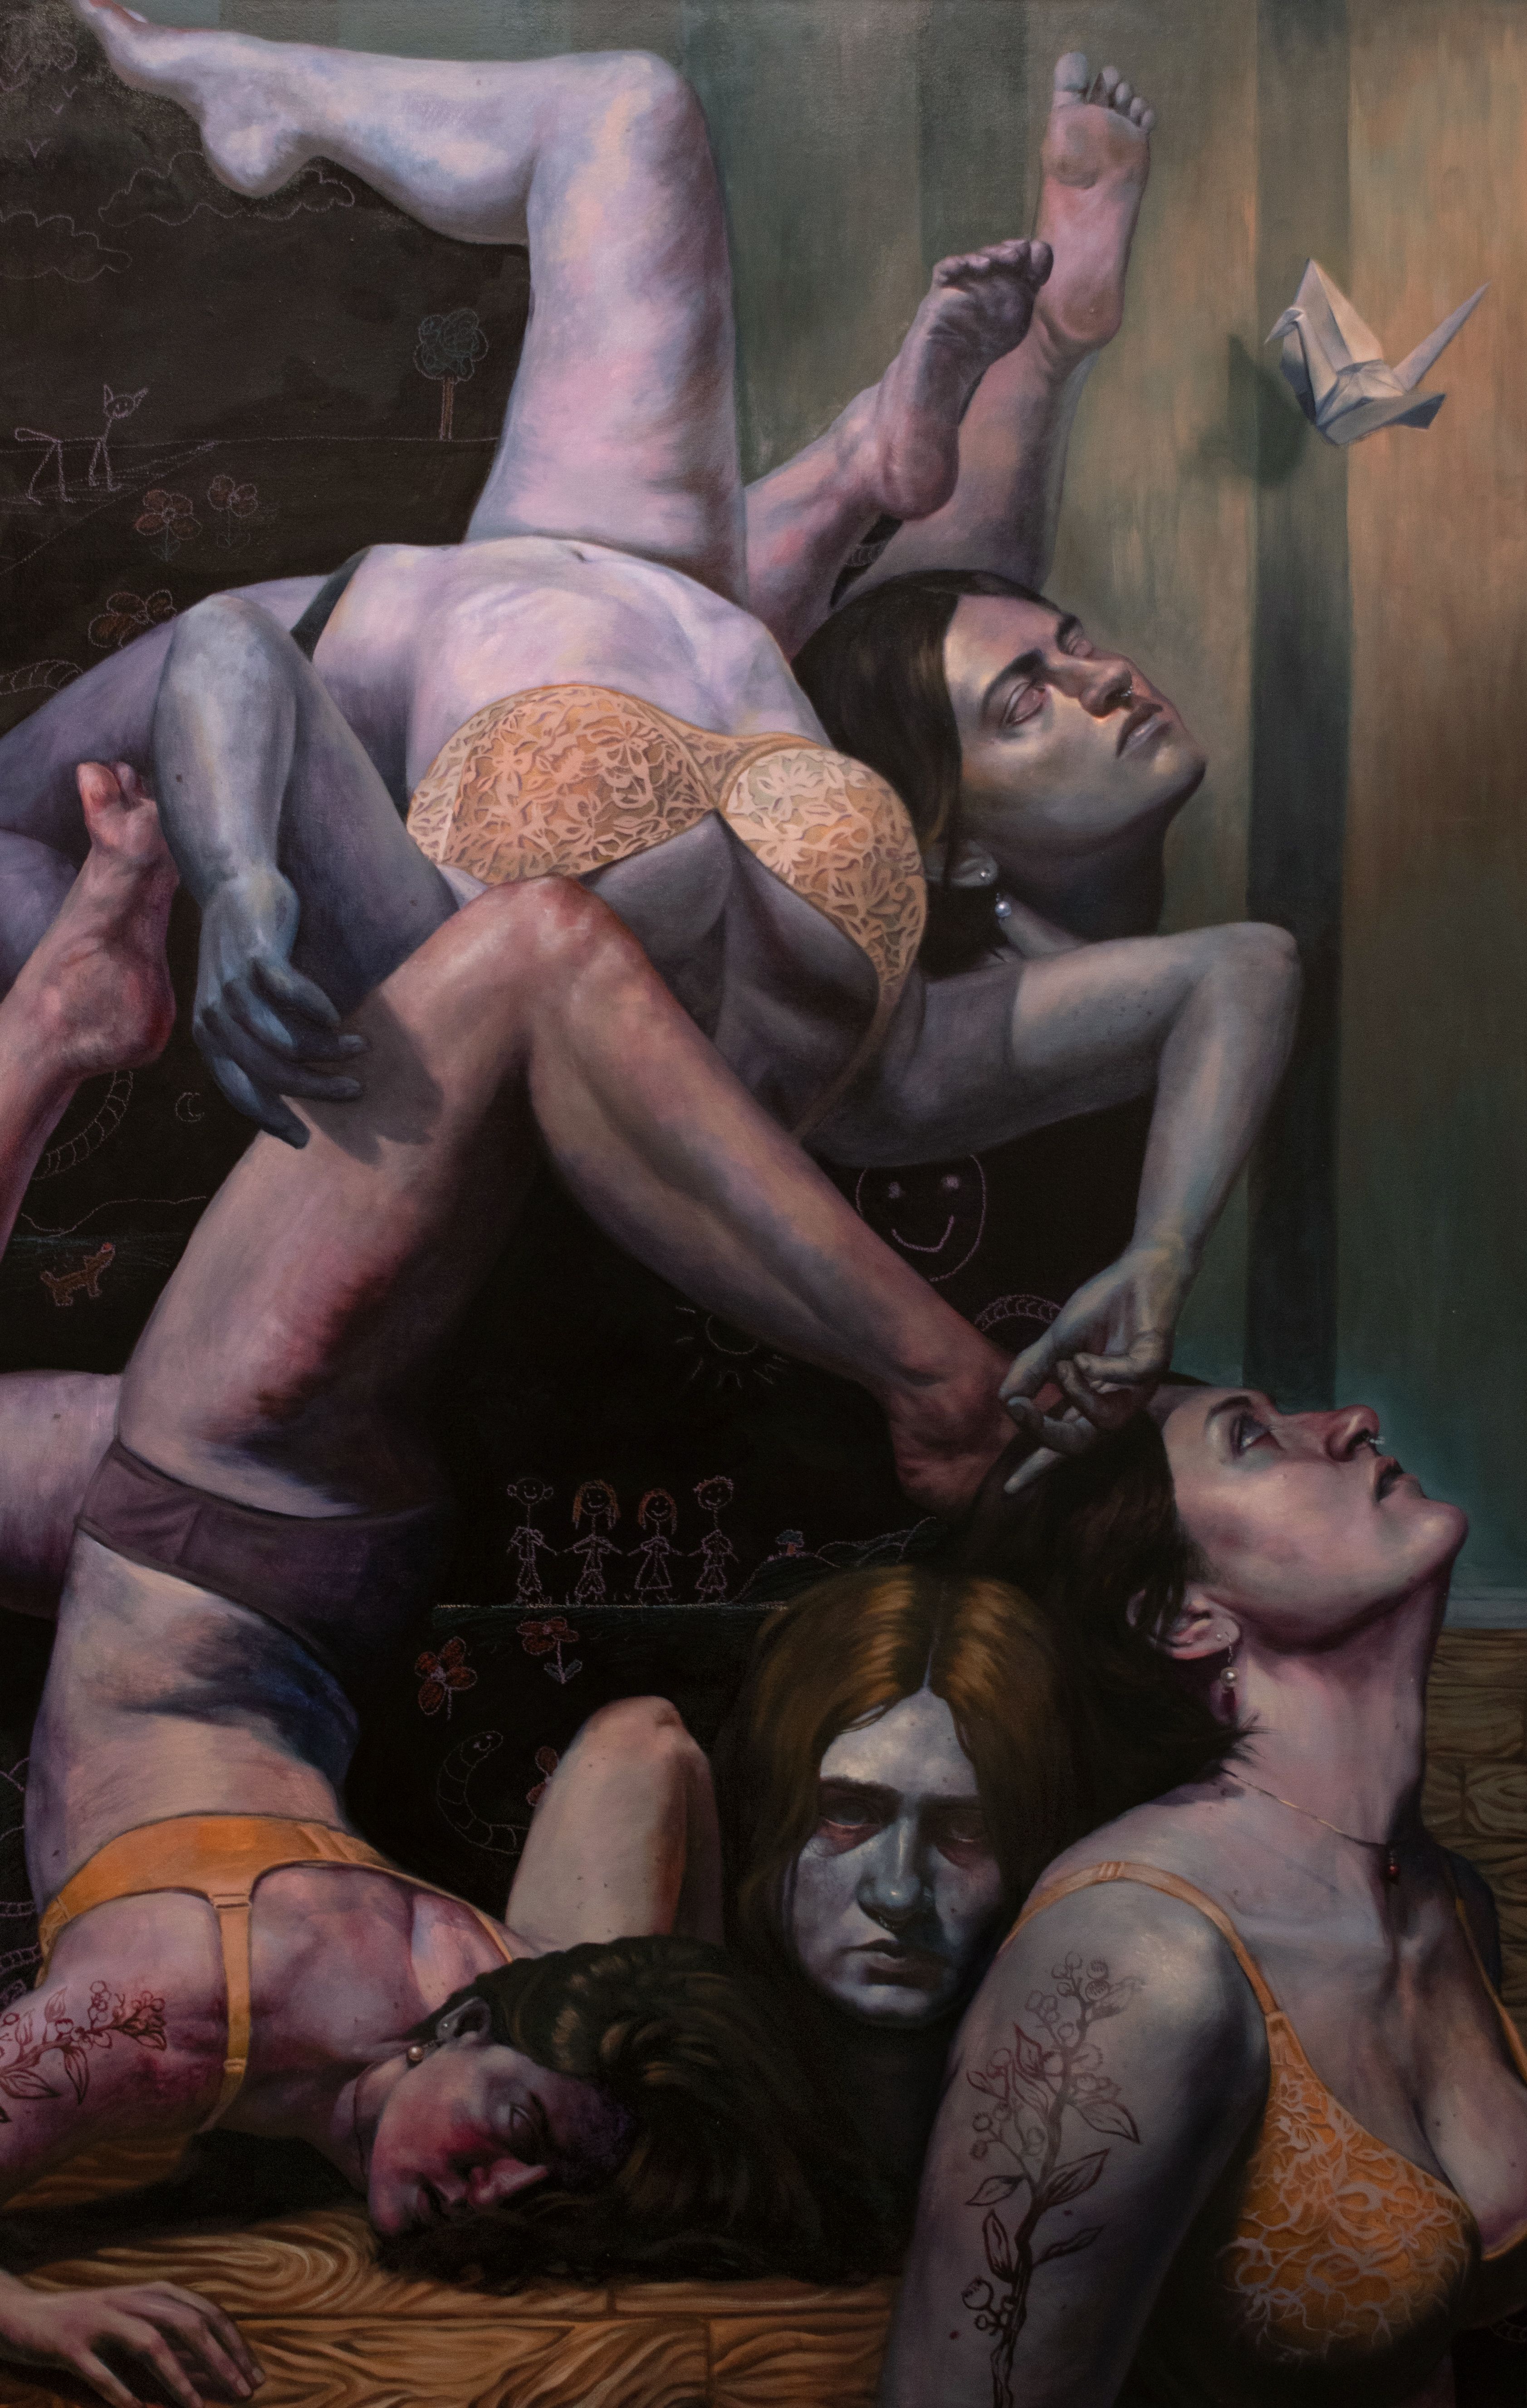 An oil painting of contorted bodies wearing only underwear piling on one another